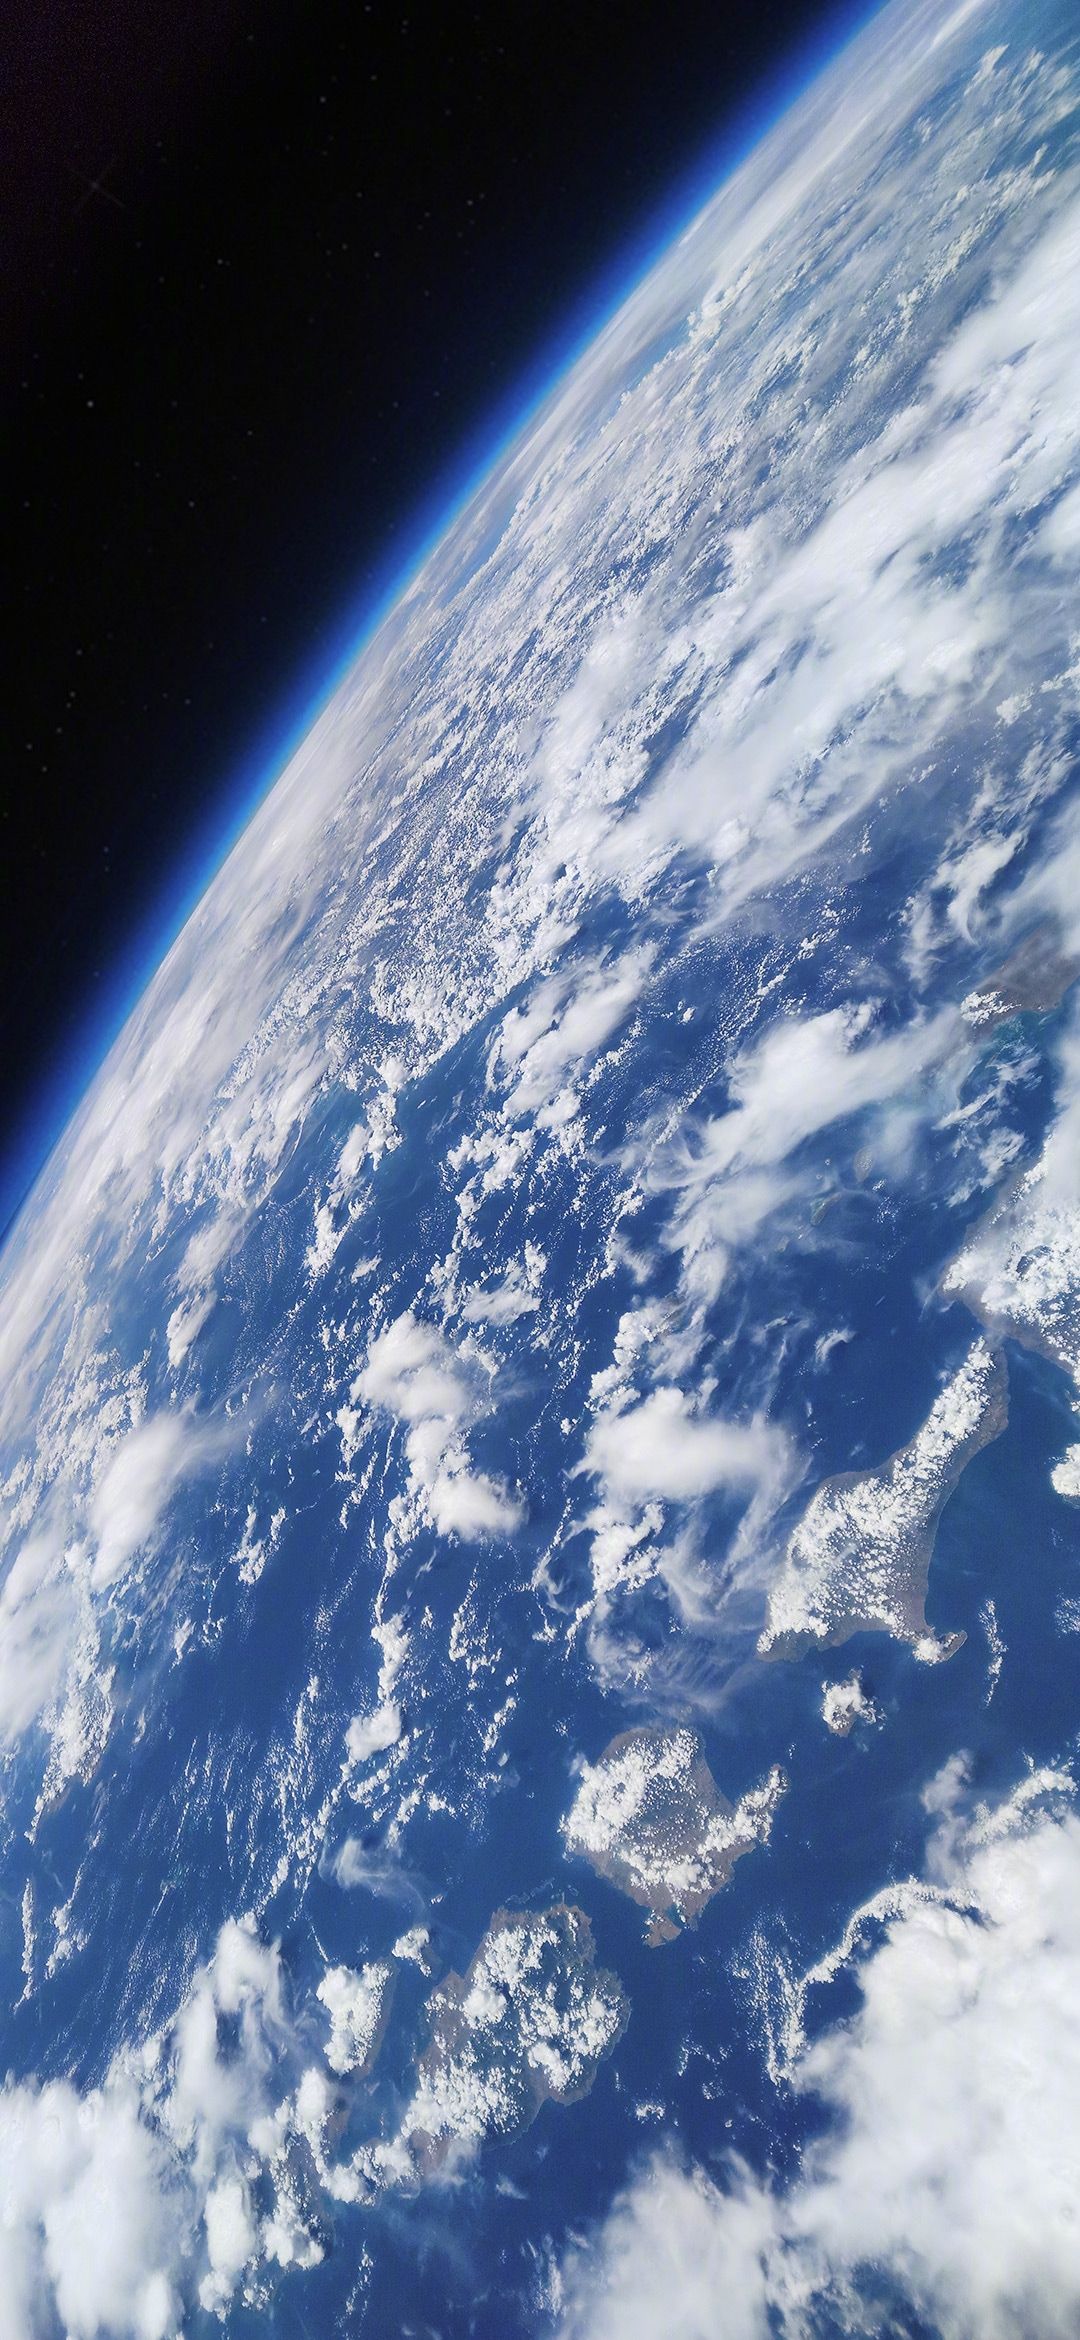 Wallpaper Sharing 丨Picture Of The Earth Taken By Xiaomi Mi 10 With 108MP Camera In Space